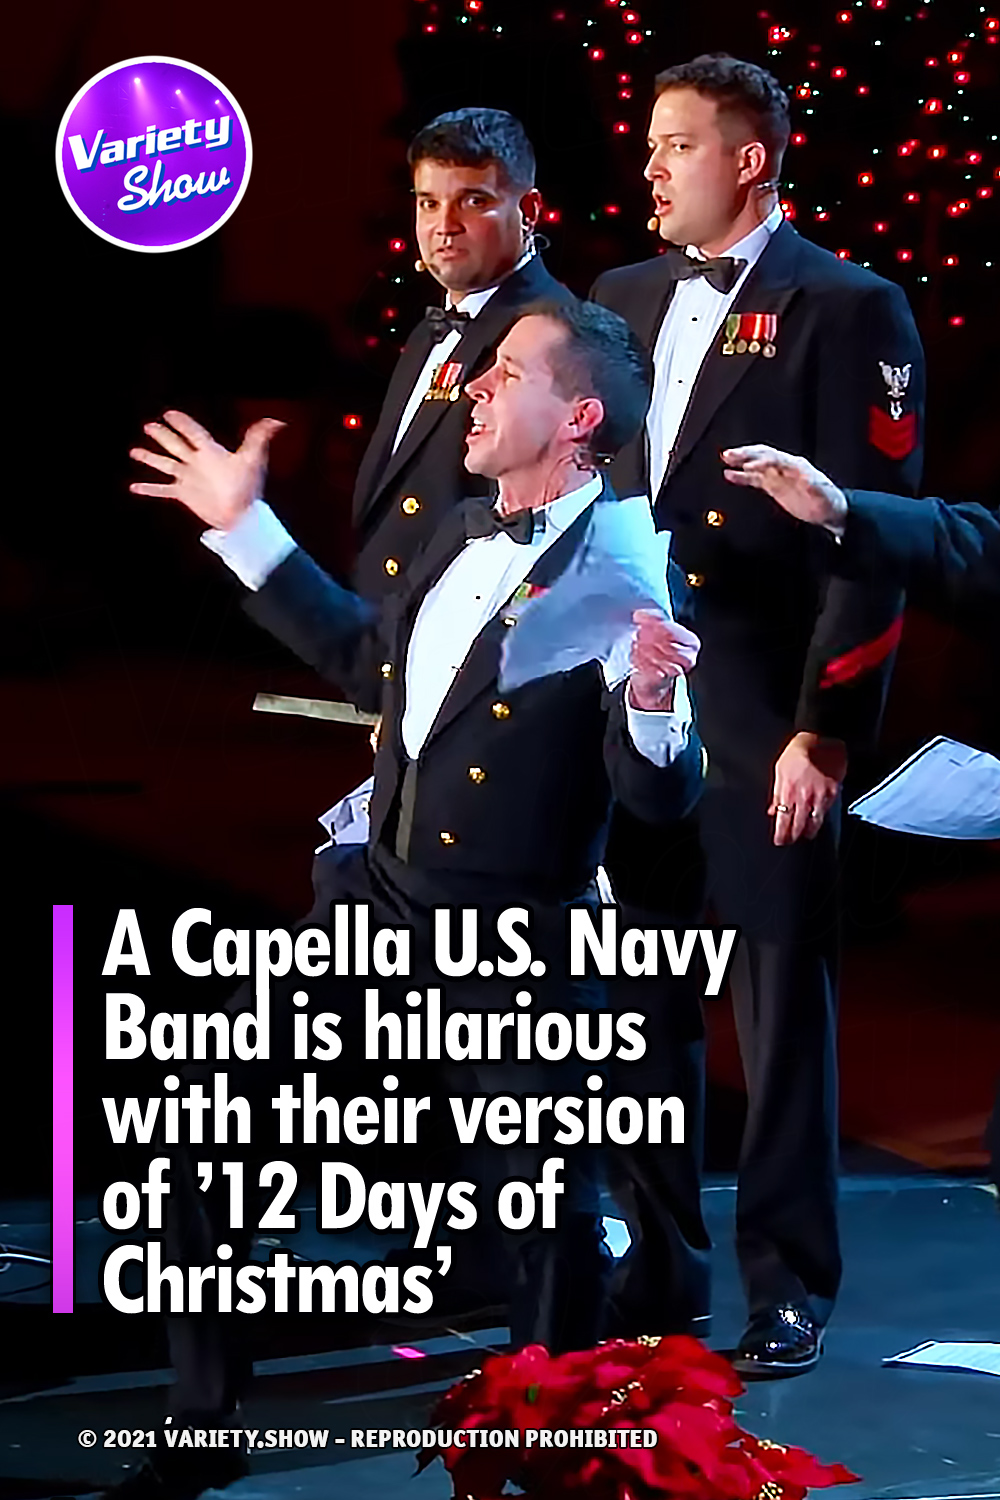 A Capella U.S. Navy Band is hilarious with their version of ’12 Days of Christmas’